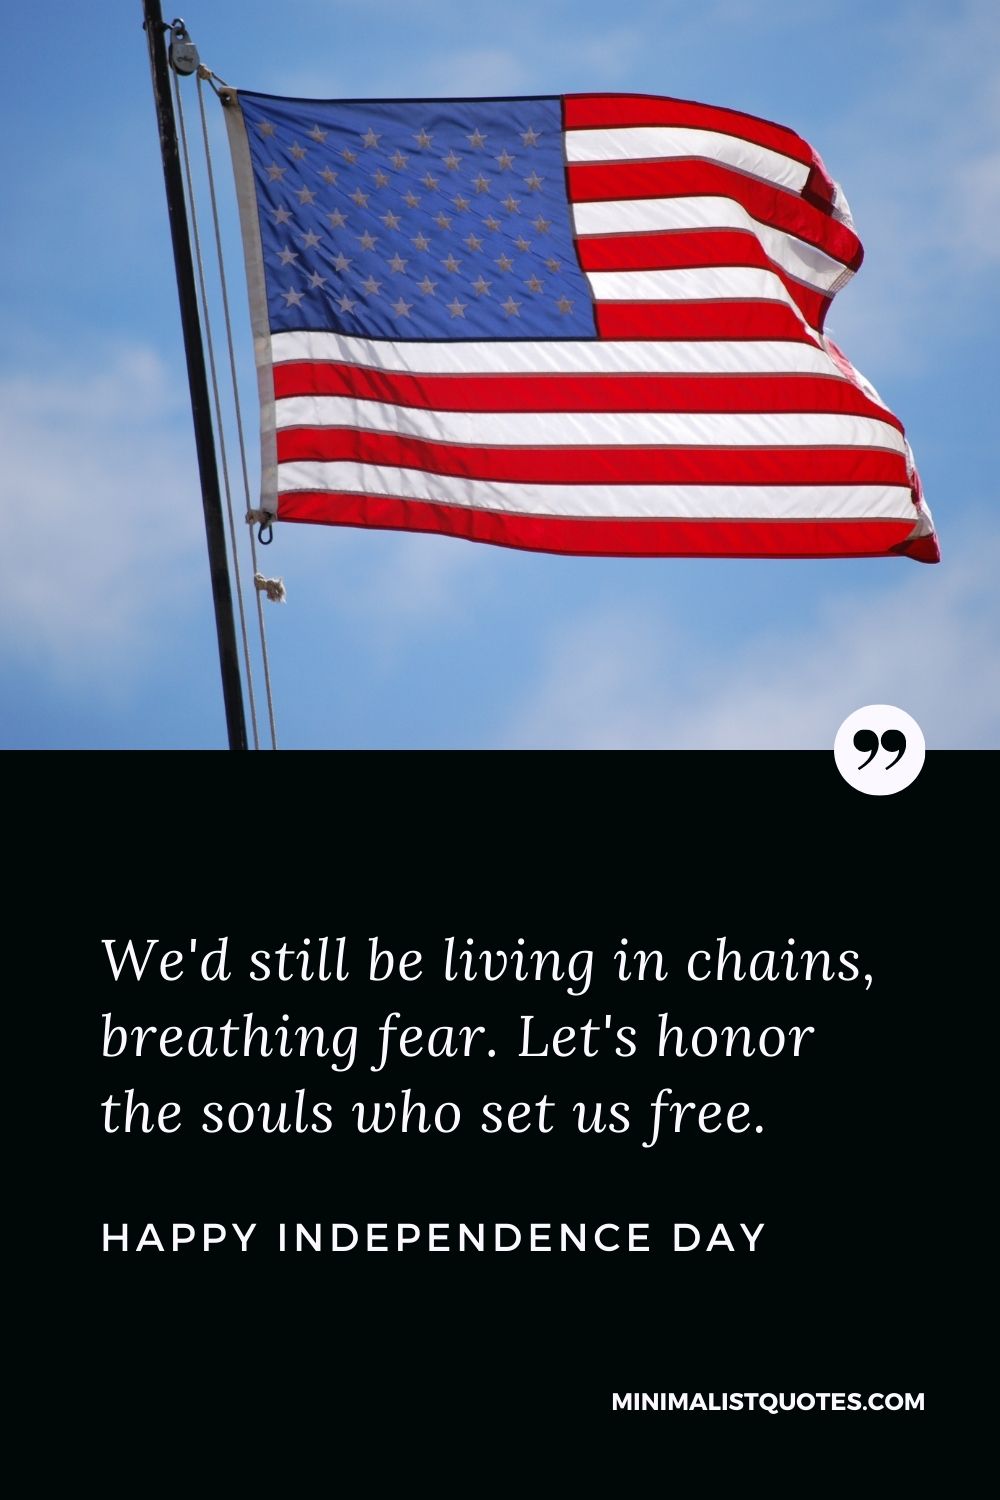 Independence Day wishes quotes with images: We'd still be living in chains, breathing fear. Let's honor the souls who set us free. Happy Independence Day!